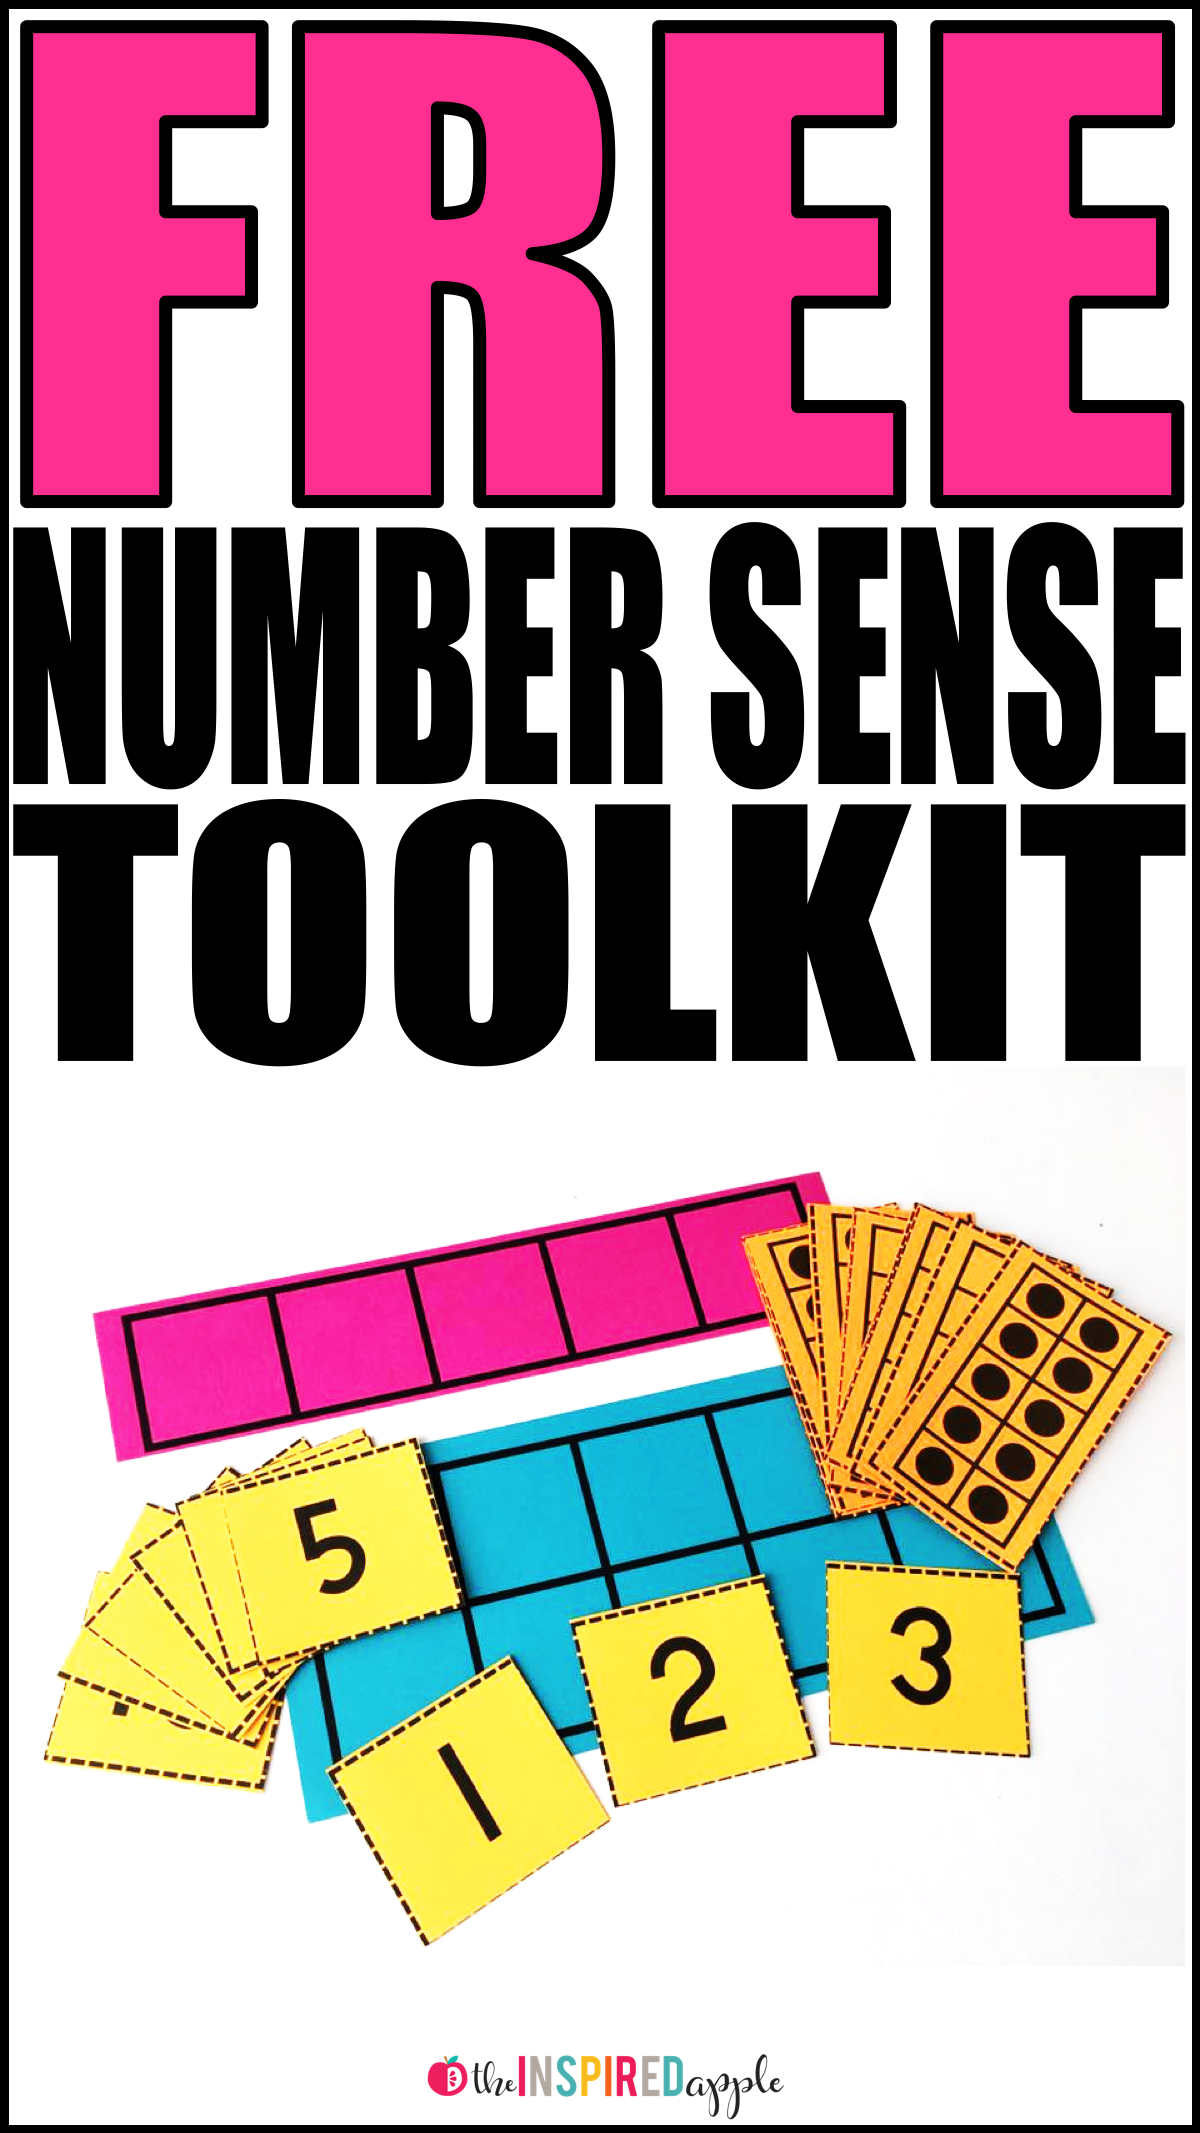 Grab this FREE number sense toolkit that includes a five frame, a ten frame, number cards 0-20, and a set of ten frame cards 0-10. Simply stash them in a gallon sized baggie, clear plastic sleeve, or dry erase pocket for simple storage and organization. They're perfect for small or whole group math activities in kindergarten, first grade, and second grade classrooms!